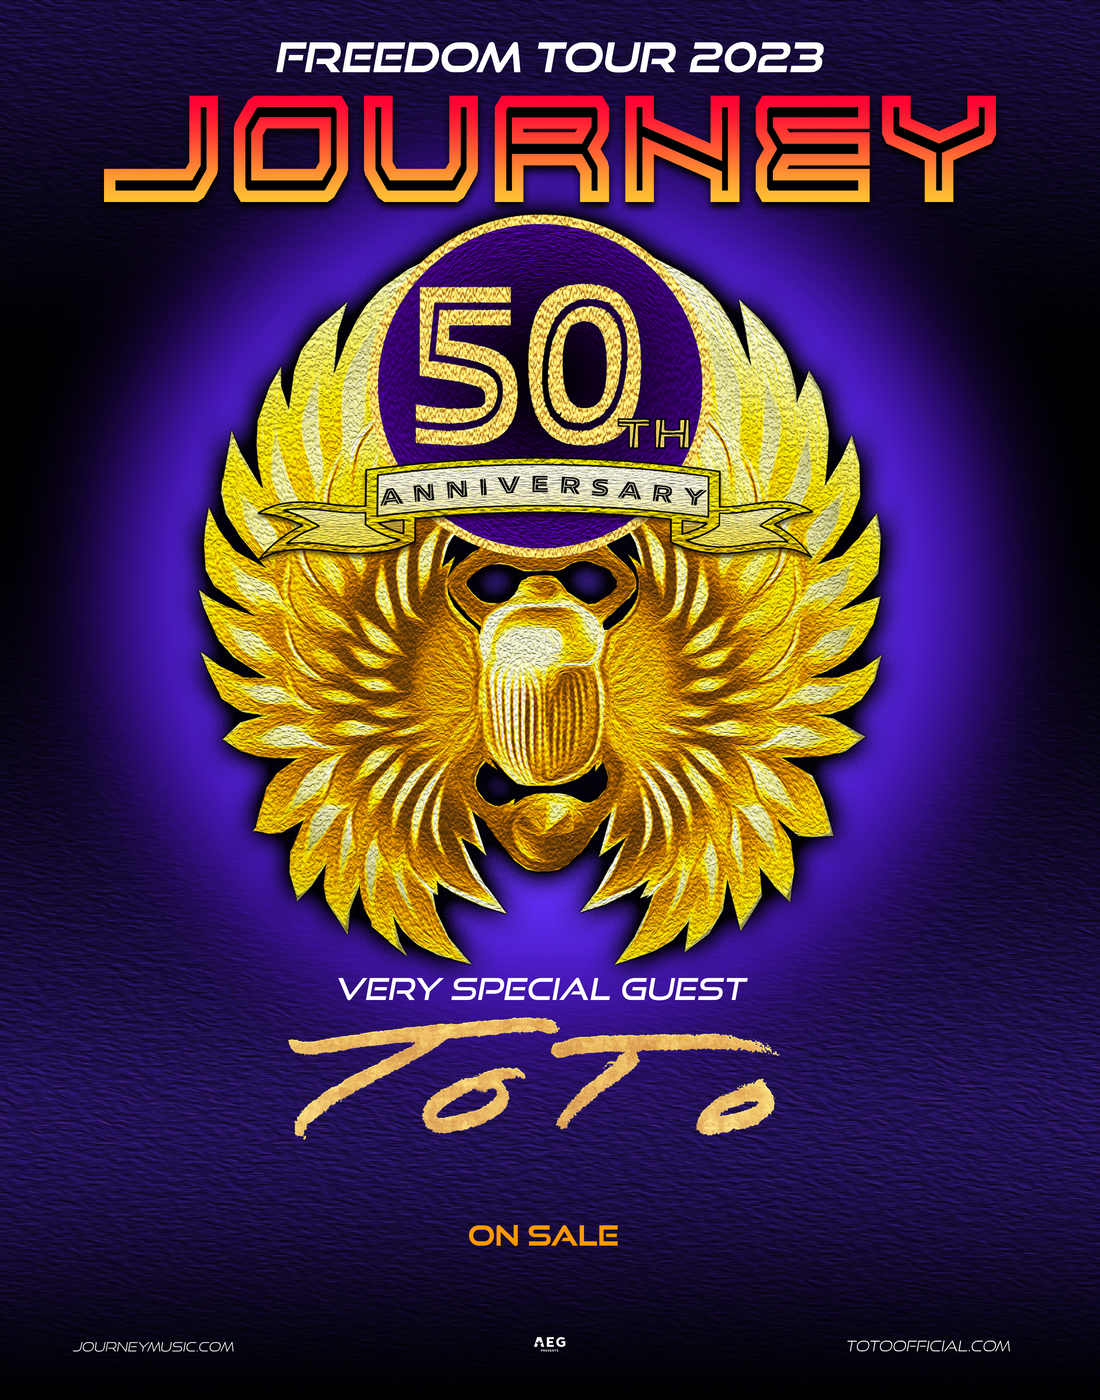 THE LEGENDARY ROCK BAND JOURNEY CELEBRATING THE 50TH ANNIVERSARY FREEDOM TOUR 2023